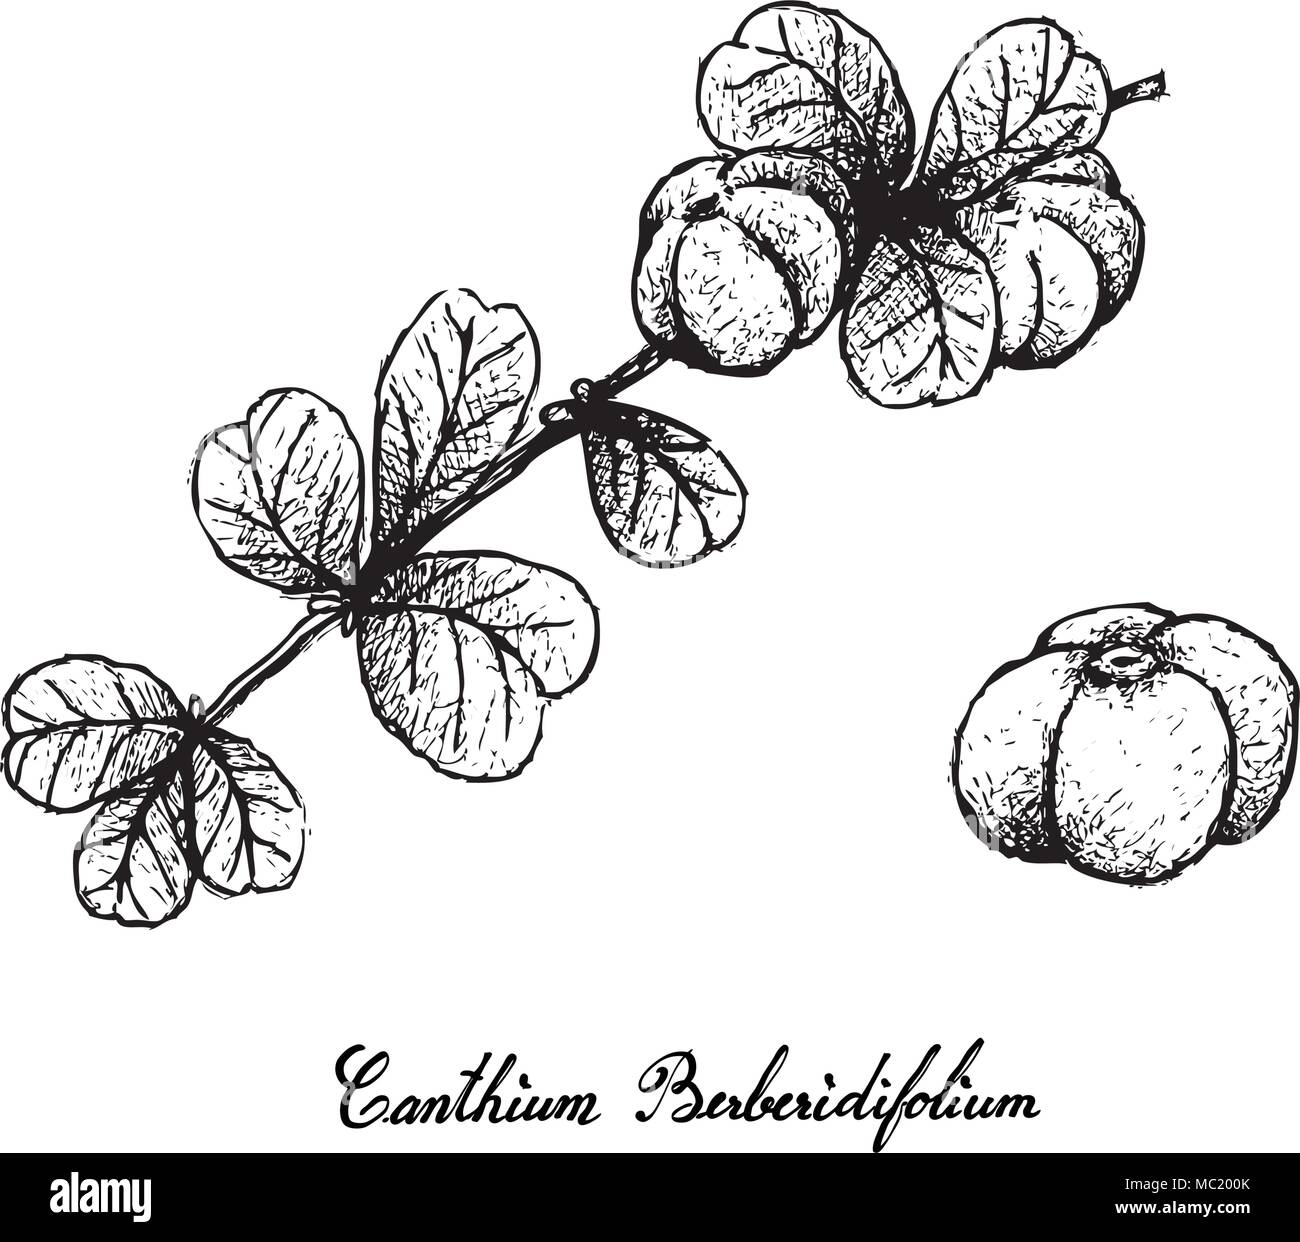 Berry Fruit, Illustration Hand Drawn Sketch of Red and Sweet Canthium Berberidifolium Frutis with Green Leaves Hanging on Tree Branch Isolated on Whit Stock Vector